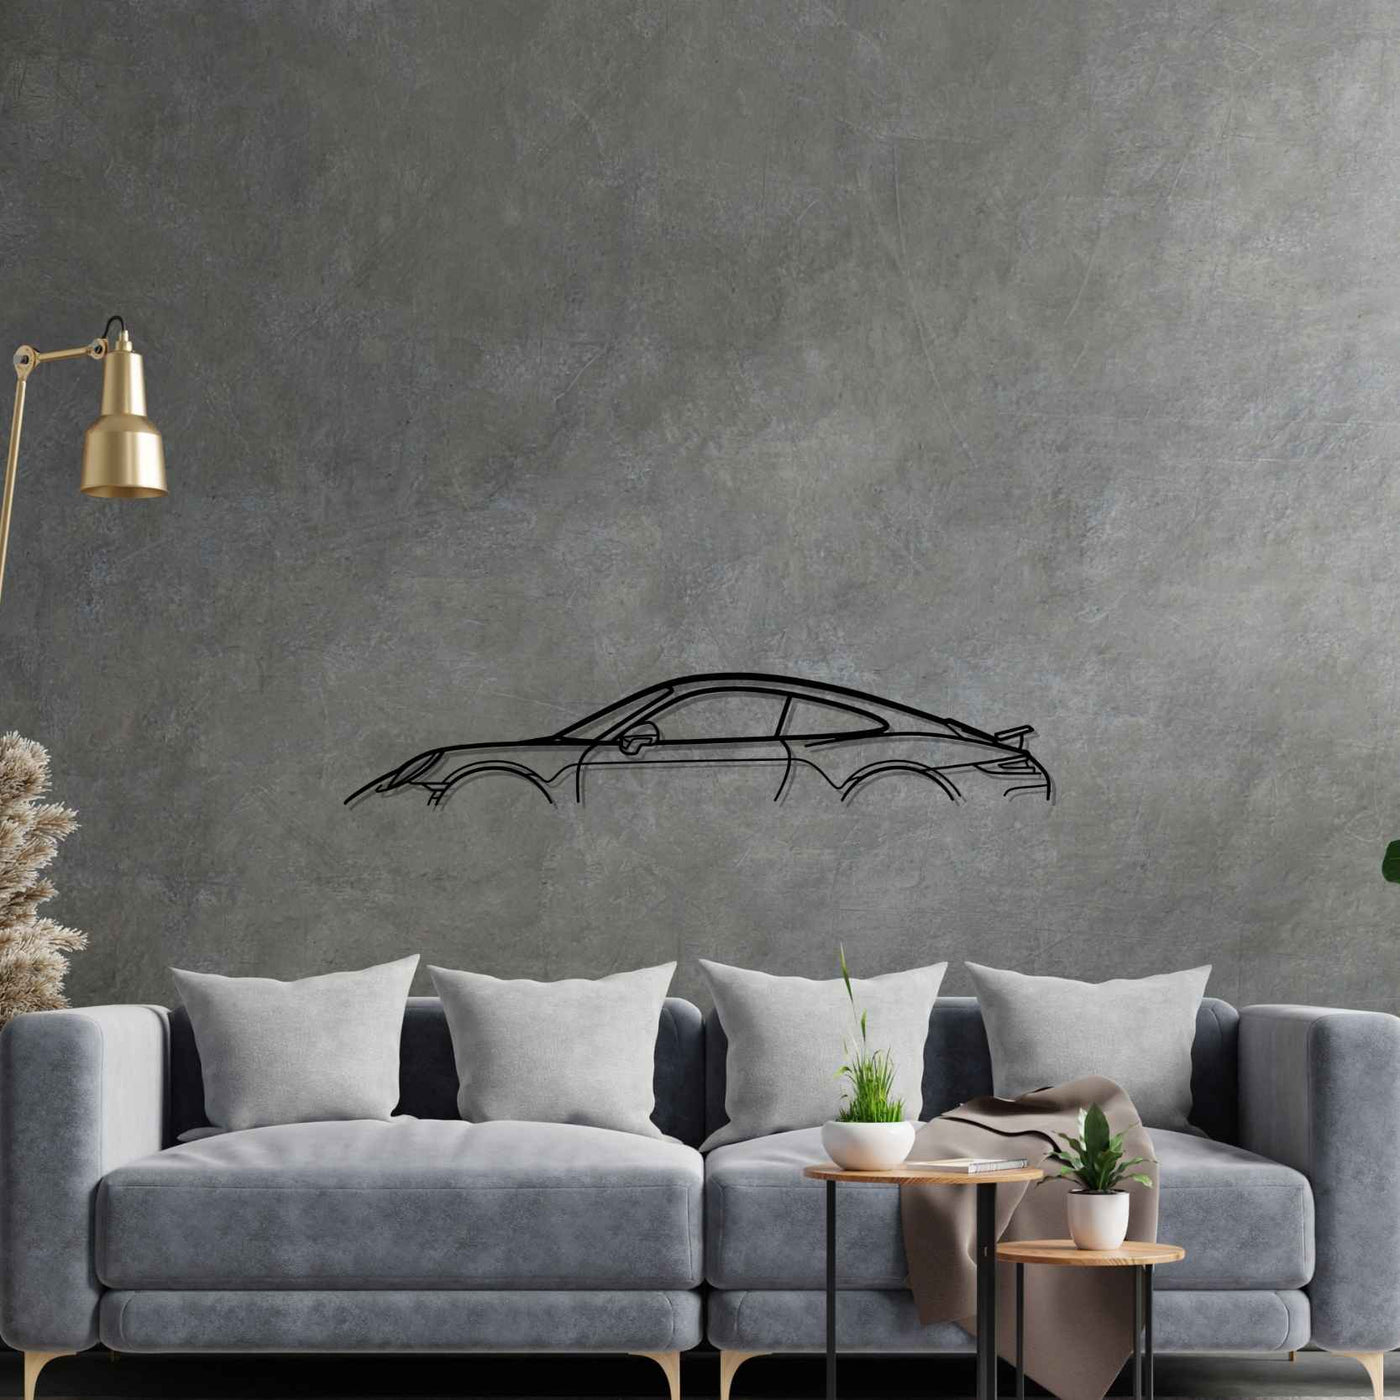 911 Model 991 GT3 Touring Classic Silhouette Metal Wall Art